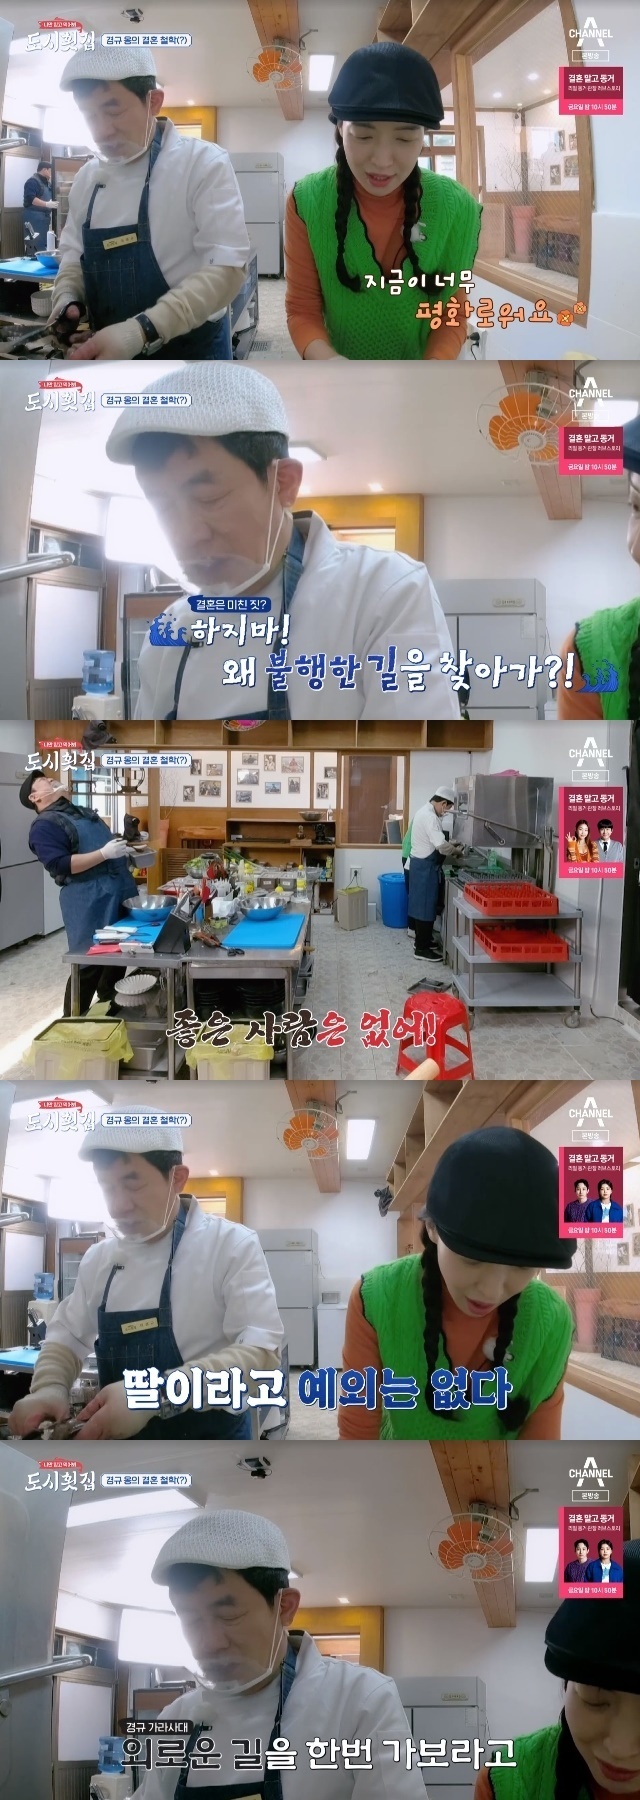 Lee Kyung-kyu recommended Yoon Se-ah to non-marriage.On April 6, the spin-off Trust me when I tell you to eat, city sashimi (hereinafter Gaduri Restaurant) of Channel A entertainment The Fishermen and the City Lee Kyung-kyu and Yoon Se-ah talked in marriage.On this day, Lee Kyung-kyu asked Yoon Se-ah, You did not marry, while he was in the ballroom with Gaduri Restaurant on the second day.When Yoon Se-ah replied, I did not do it, Lee Kyung-kyu asked, You did not do it anyway. Will not you? Yoon Se-ah said, Now is too peaceful life.Lee Kyung-kyu advised, Do not do that. Why do you go to the unfortunate way? Do not go to the unfortunate way. Yoon Se-ah said, Why are you doing this?Lee Kyung-kyu said, There is no good person. Where is a good person? Yoon Se-ah said, Where is the right person? There is no such man with you, he said firmly.Yoon Se-ah mentioned Lee Ye Rim, daughter of Lee Kyung-kyu, who was married, saying, Why dont you say that to your daughter? Then Lee Kyung-kyu said, I did, but then I went.When Yoon Se-ah said, Its a lonely road, so you should go. Didnt you go to see Father? Im sure hes doing well at home, so the groom will do well, she said. Father didnt go home well. My daughter knows that.Yoon Se-ah said, Is not it good not to go home well? Lee Kyung-kyu said, Its good. My daughter knows it.Meanwhile, Yoon Se-ah was born in 1978 and is 46 years old in Korea this year.